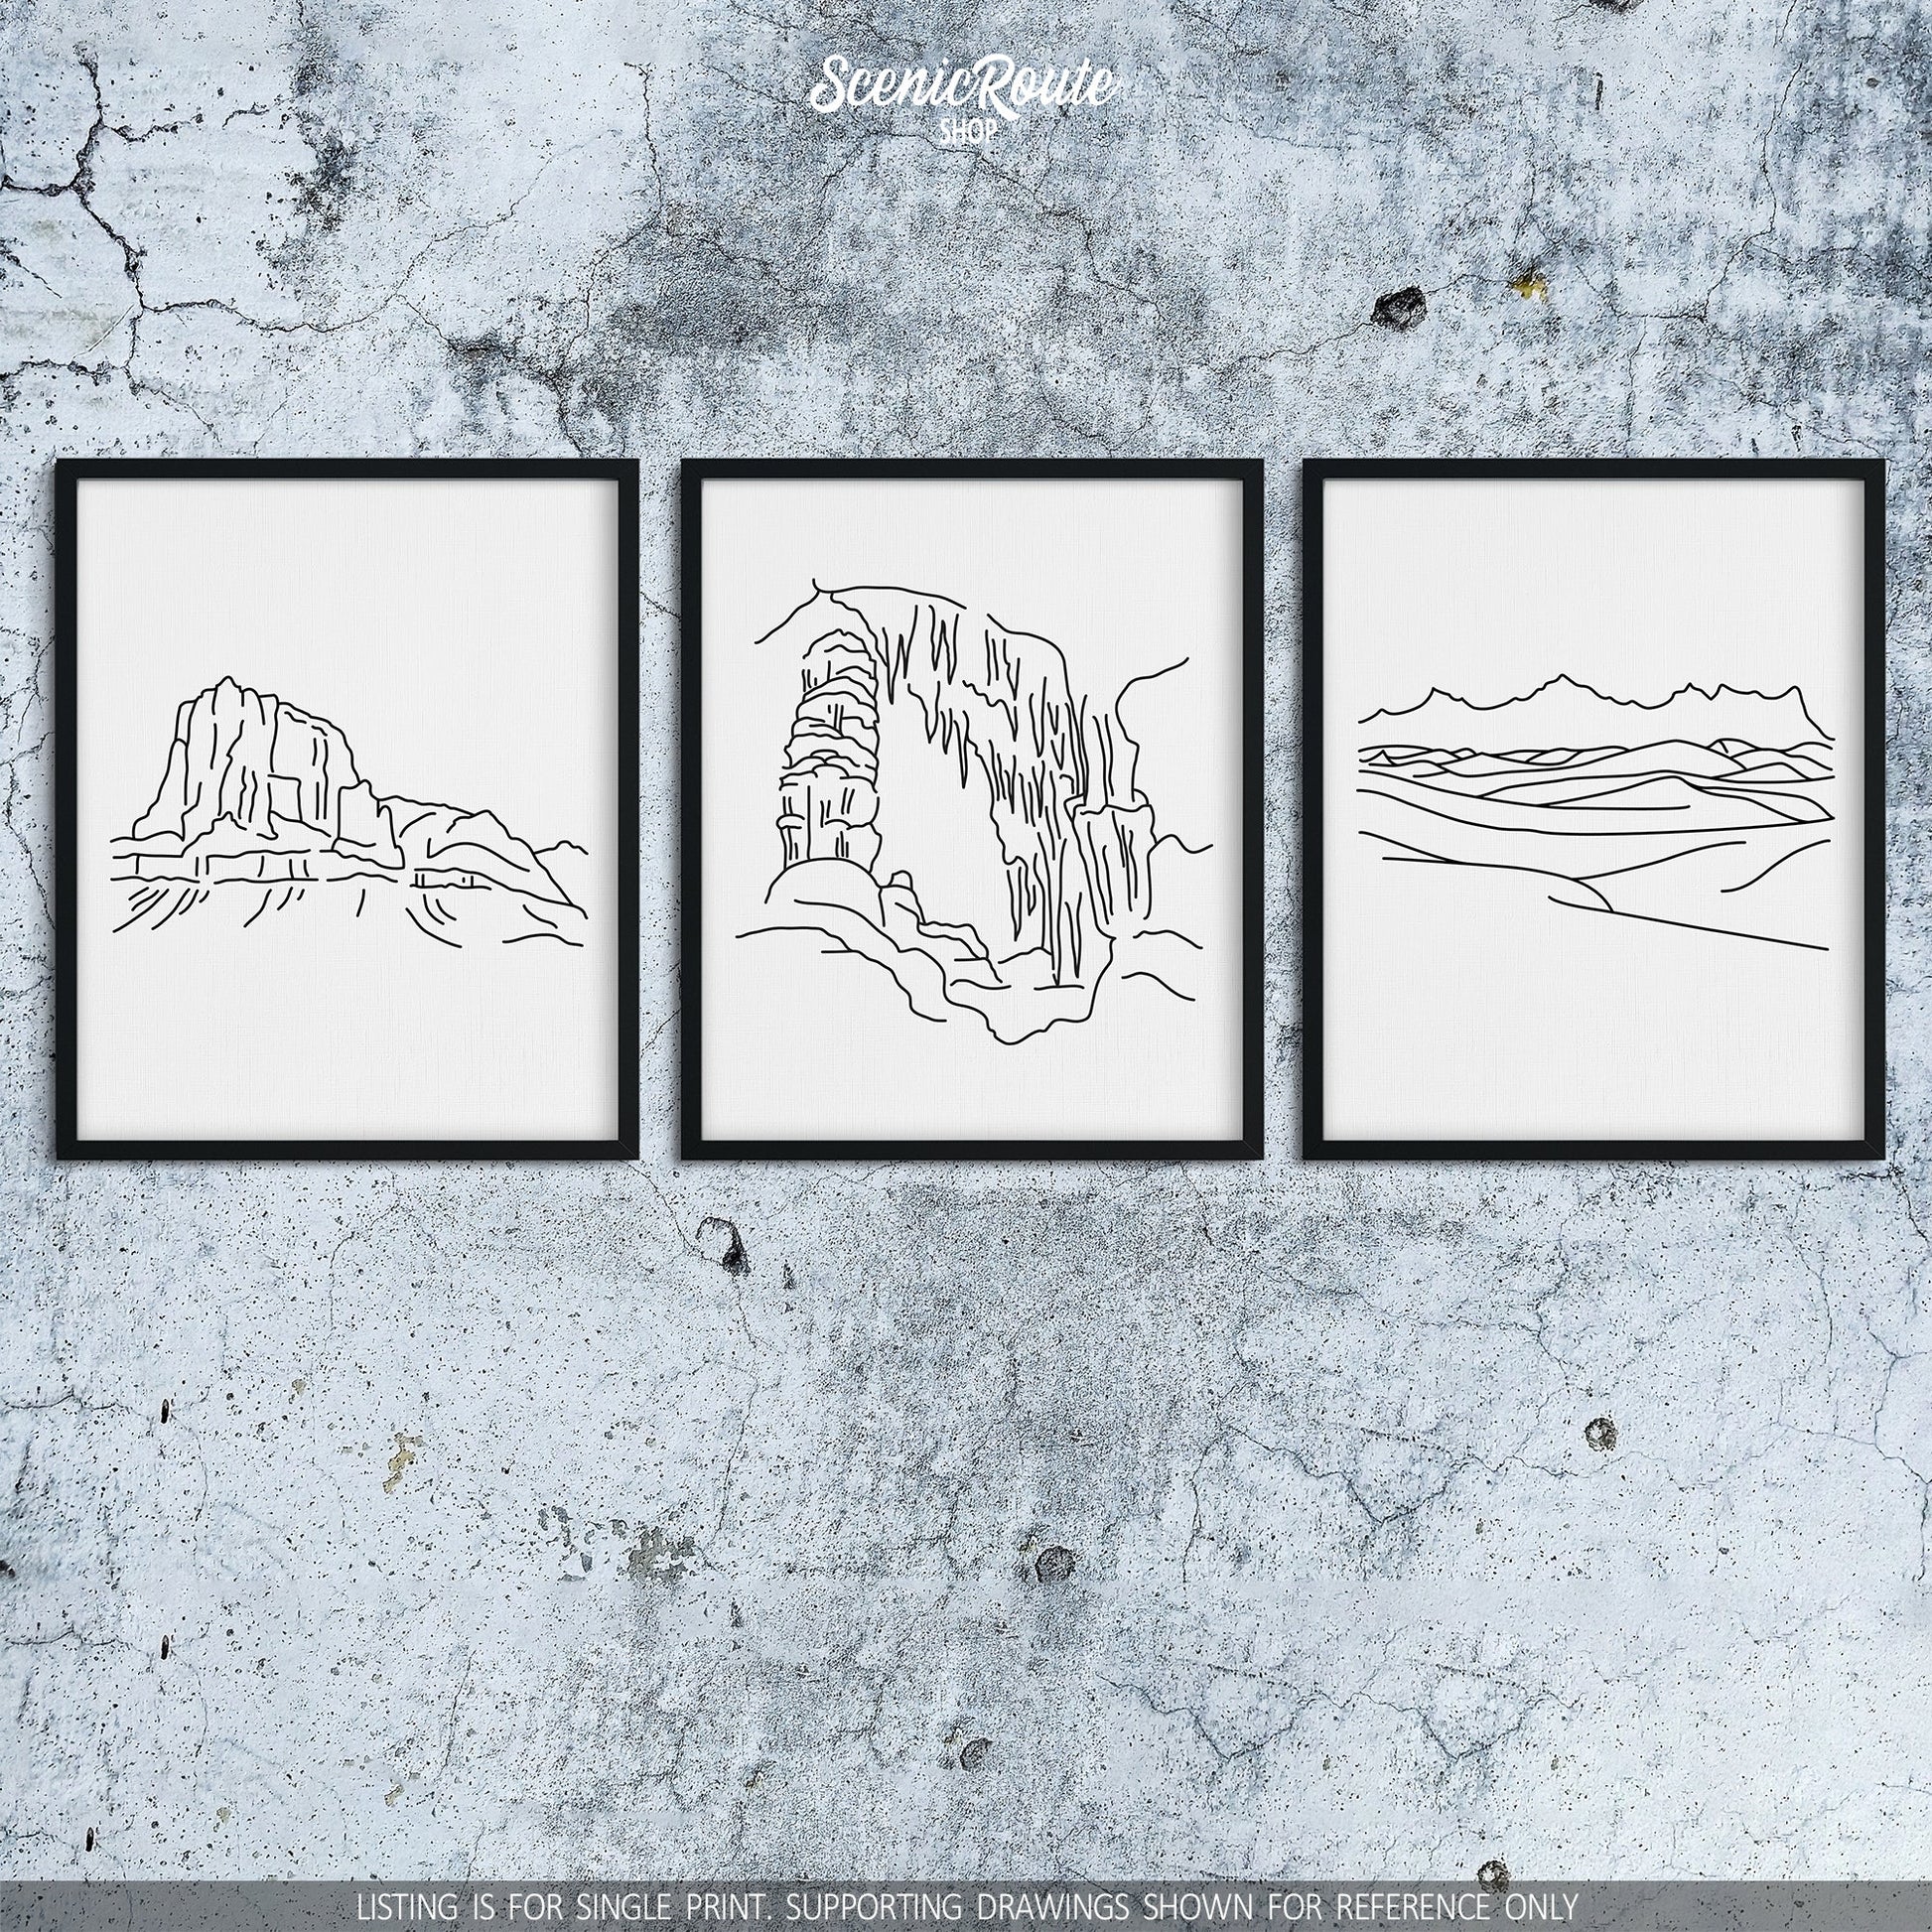 A group of three framed drawings on a concrete wall. The line art drawings include Guadalupe Mountains National Park, Carlsbad Caverns National Park, and White Sands National Park